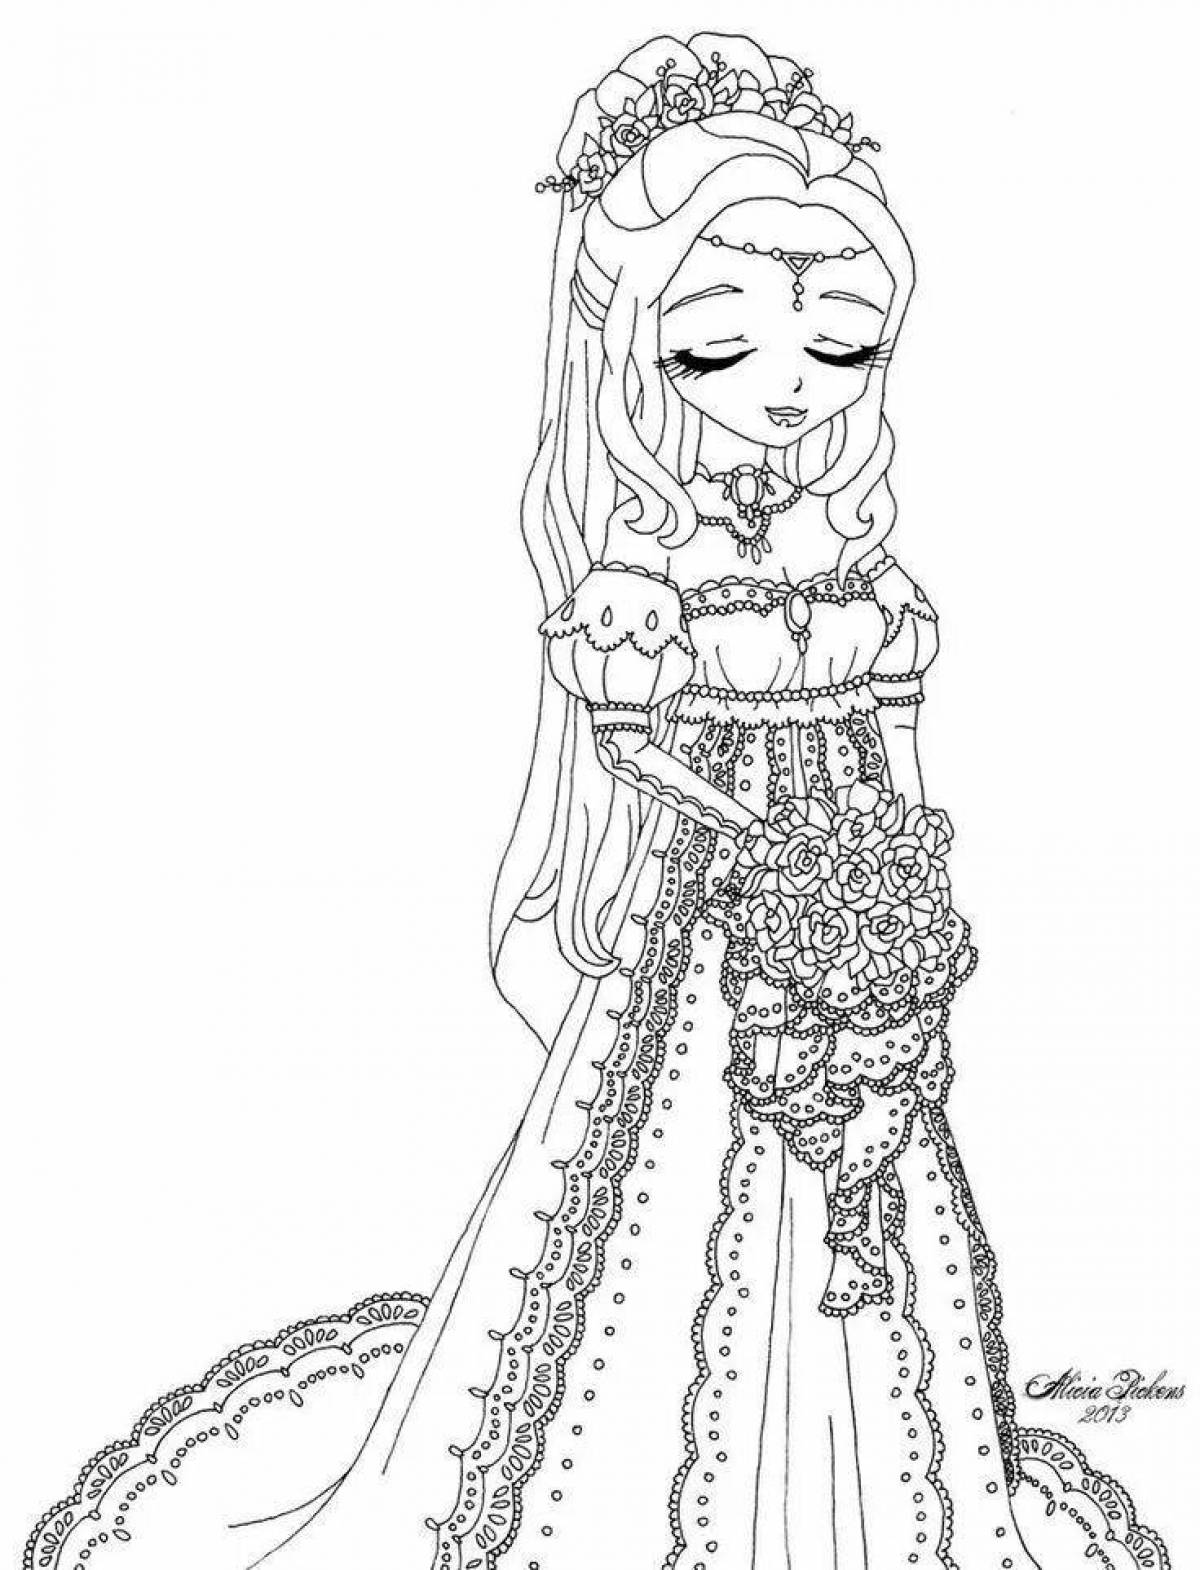 Ethereal bride coloring page